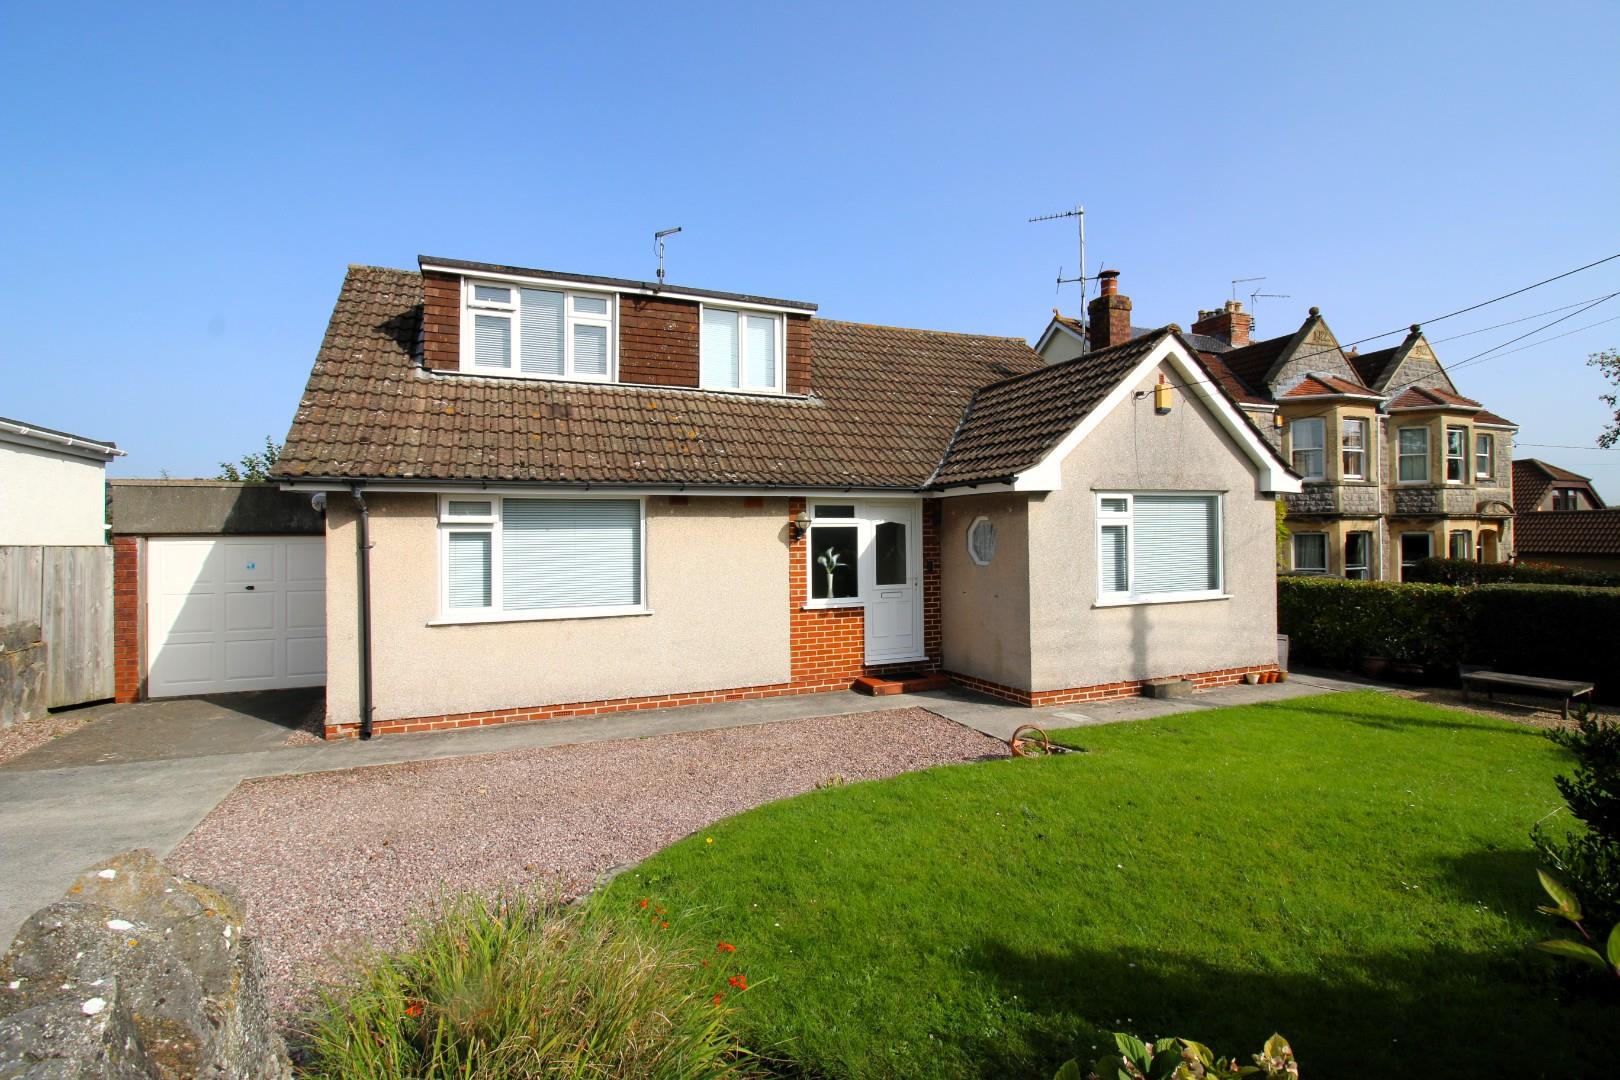 Detached house within a short walk of central Yatton